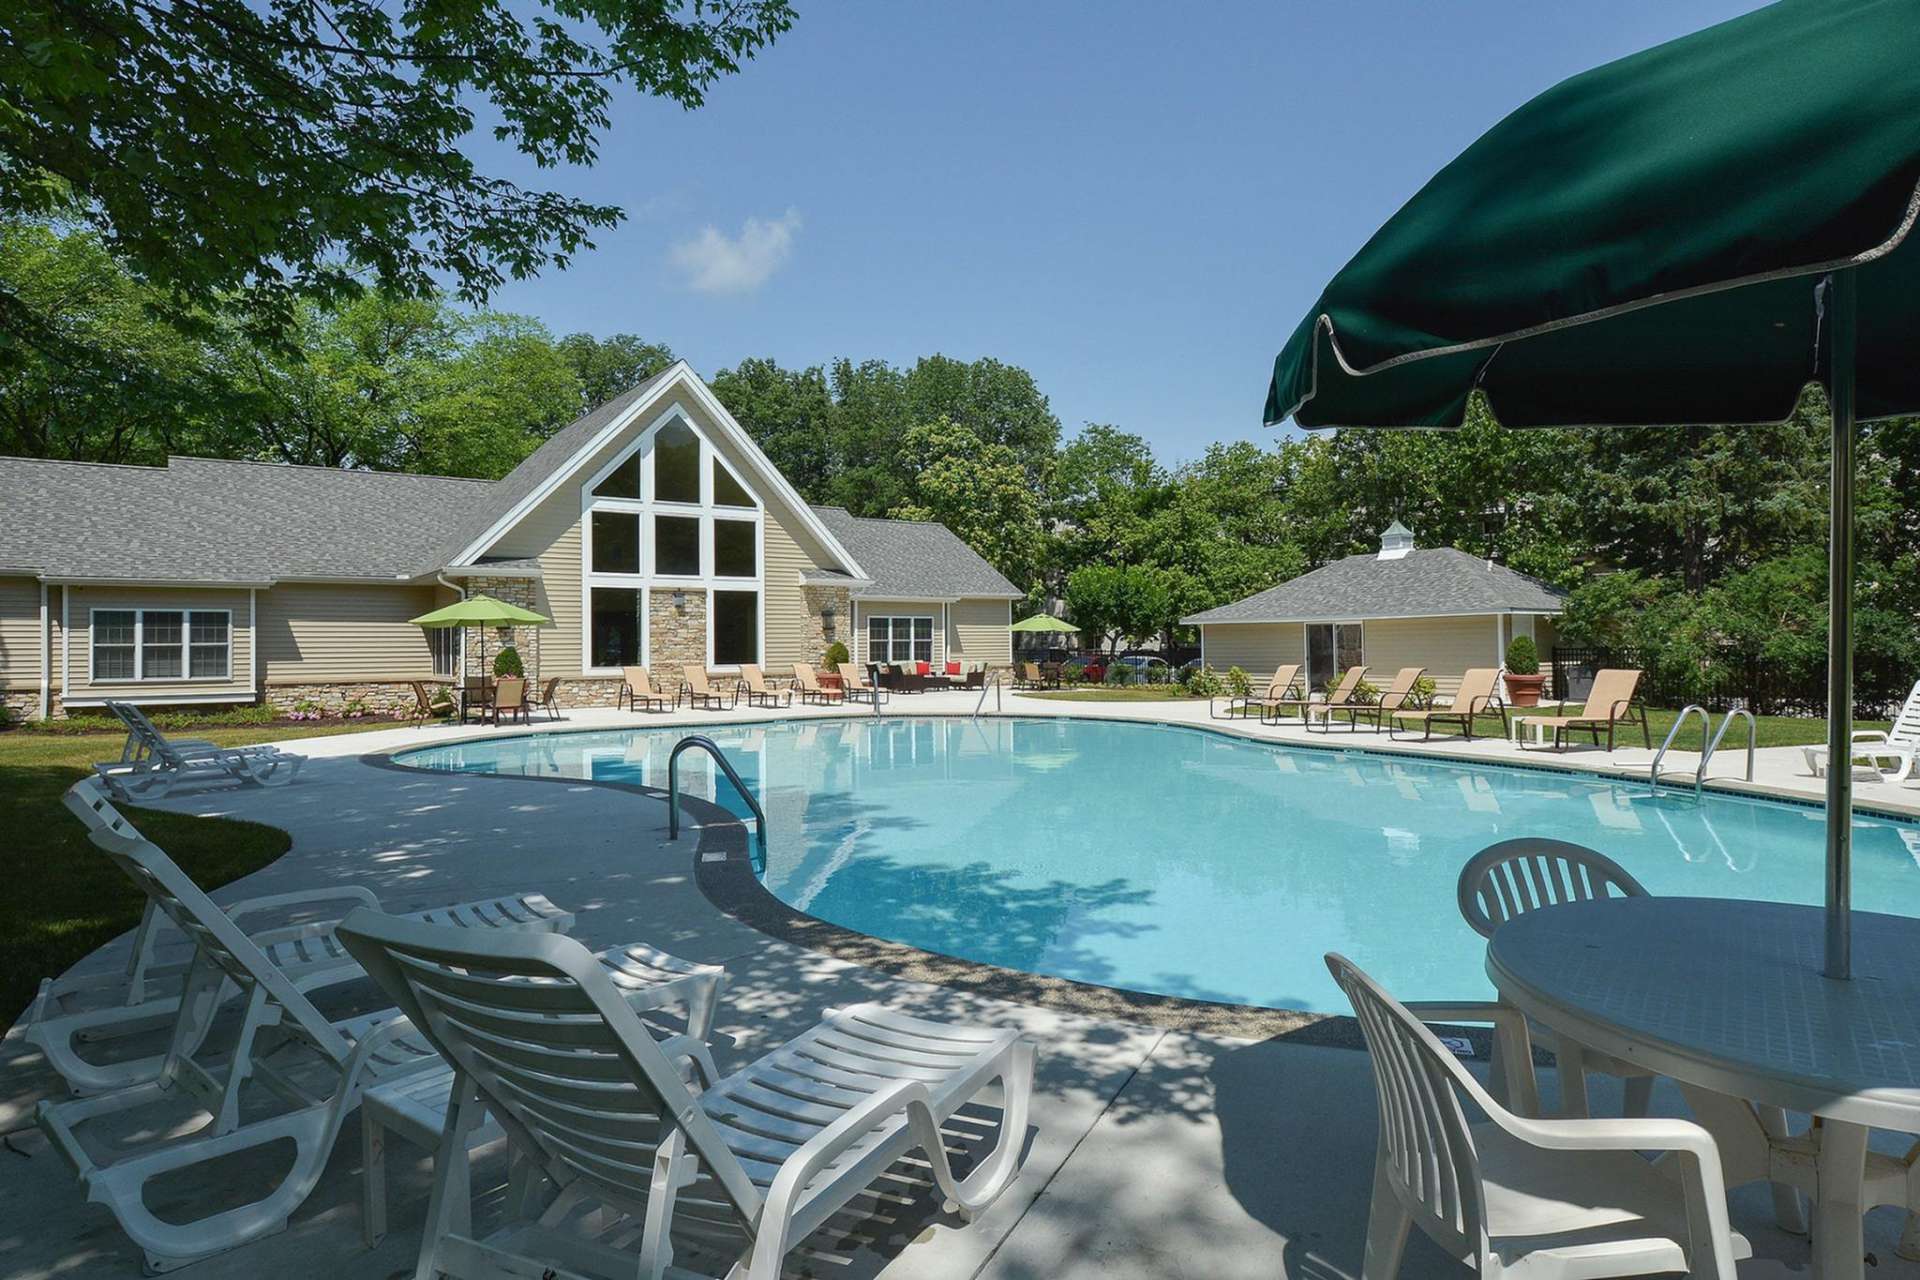 Large clubhouse with a dazzling pool surrounded by lounge chairs at The Lafyette